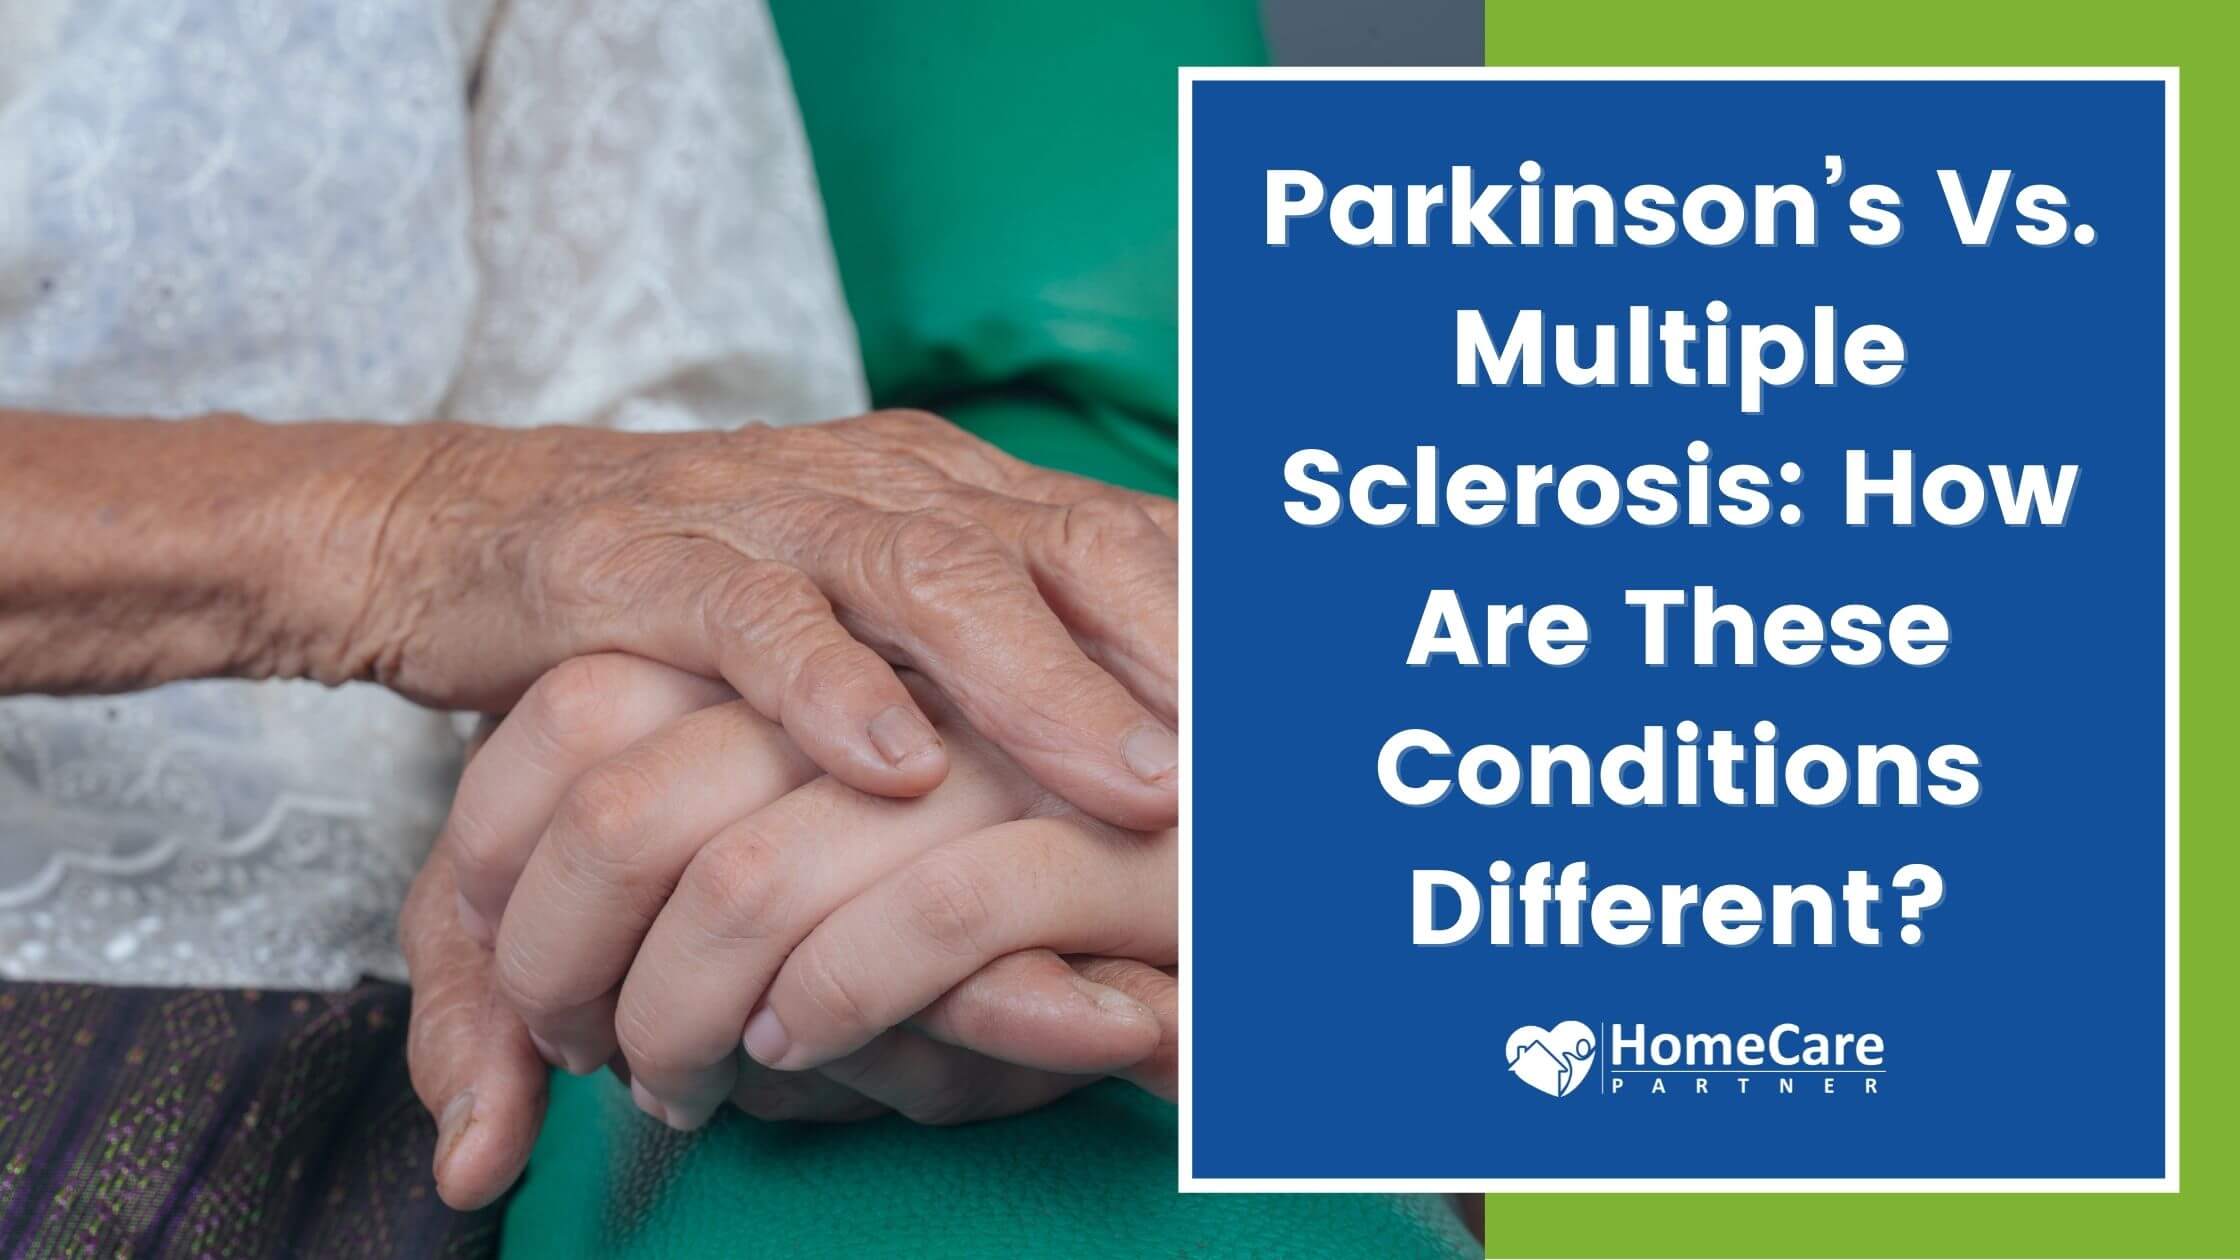 Parkinson’s Vs. Multiple Sclerosis: How Are These Conditions Different?